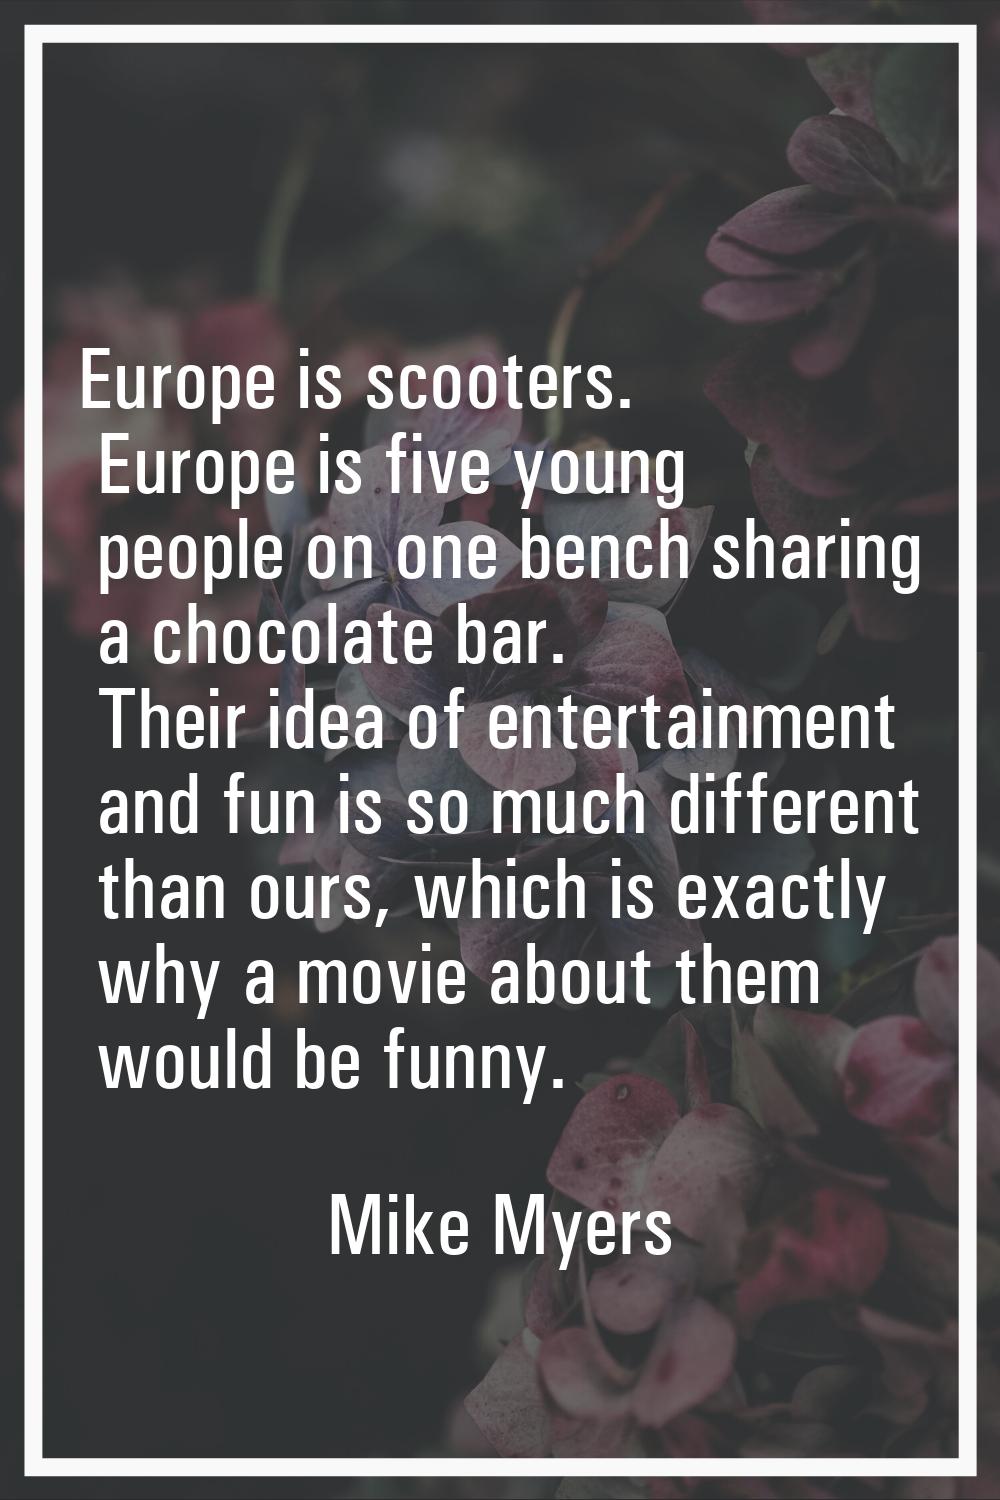 Europe is scooters. Europe is five young people on one bench sharing a chocolate bar. Their idea of